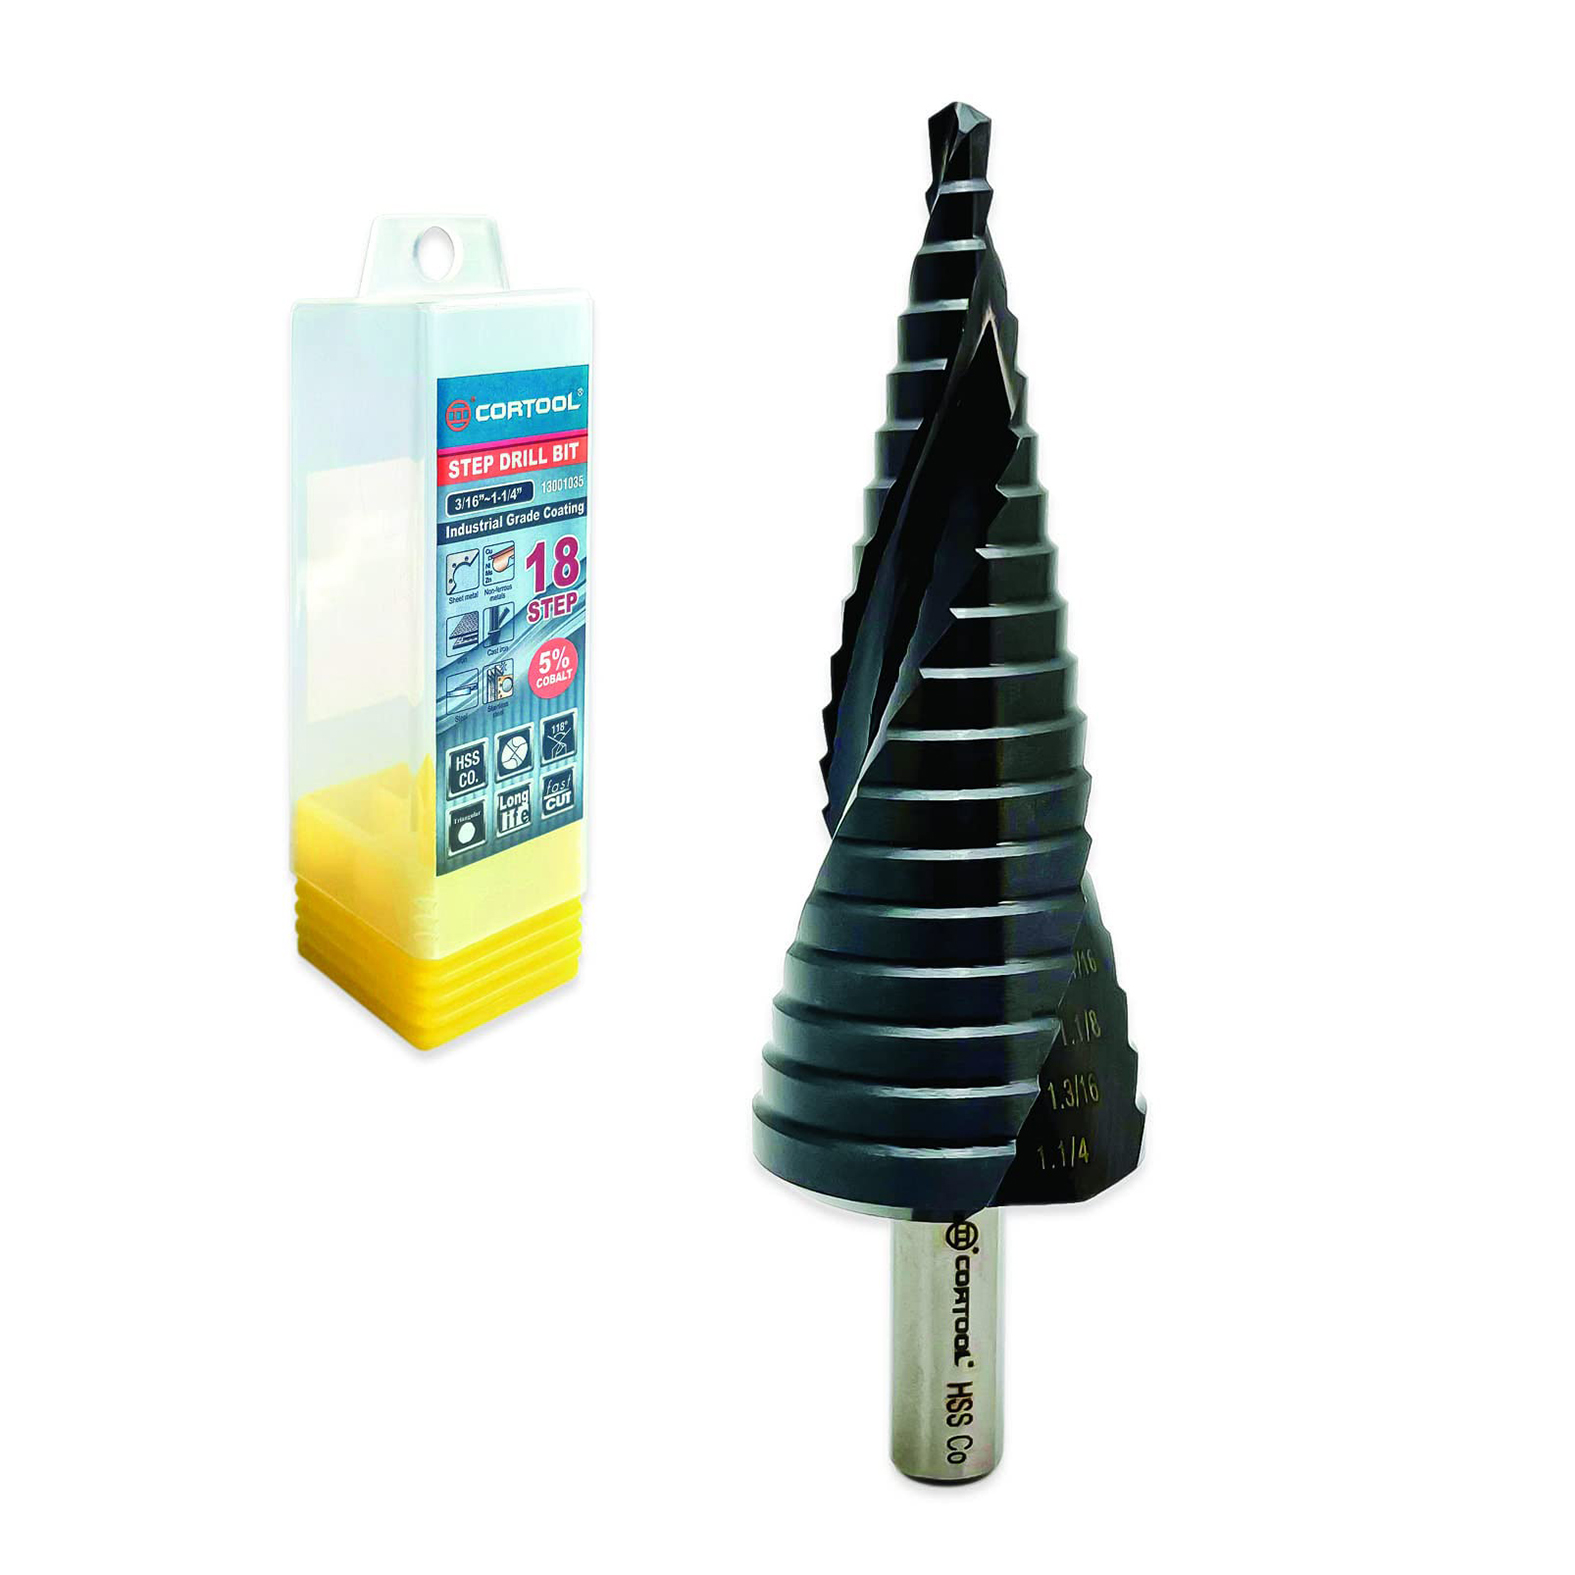 Step Bit 3/16” to 1-1/4” Inch HSS Co M35 Cobalt Step Drill Bit for Stainless Steel and Hard Metal 18 Steps